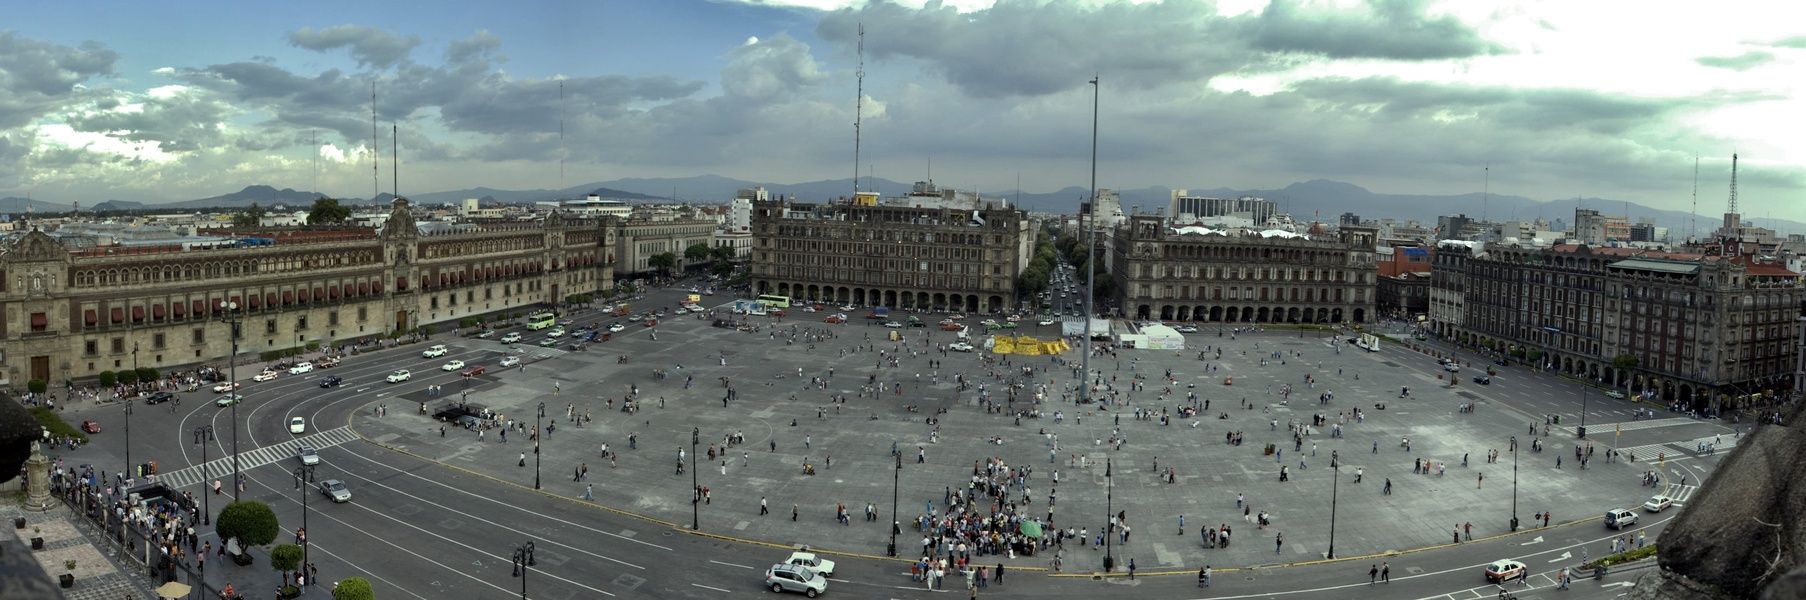 TripAdvisor reviews in Mexico City rave about El Zocalo